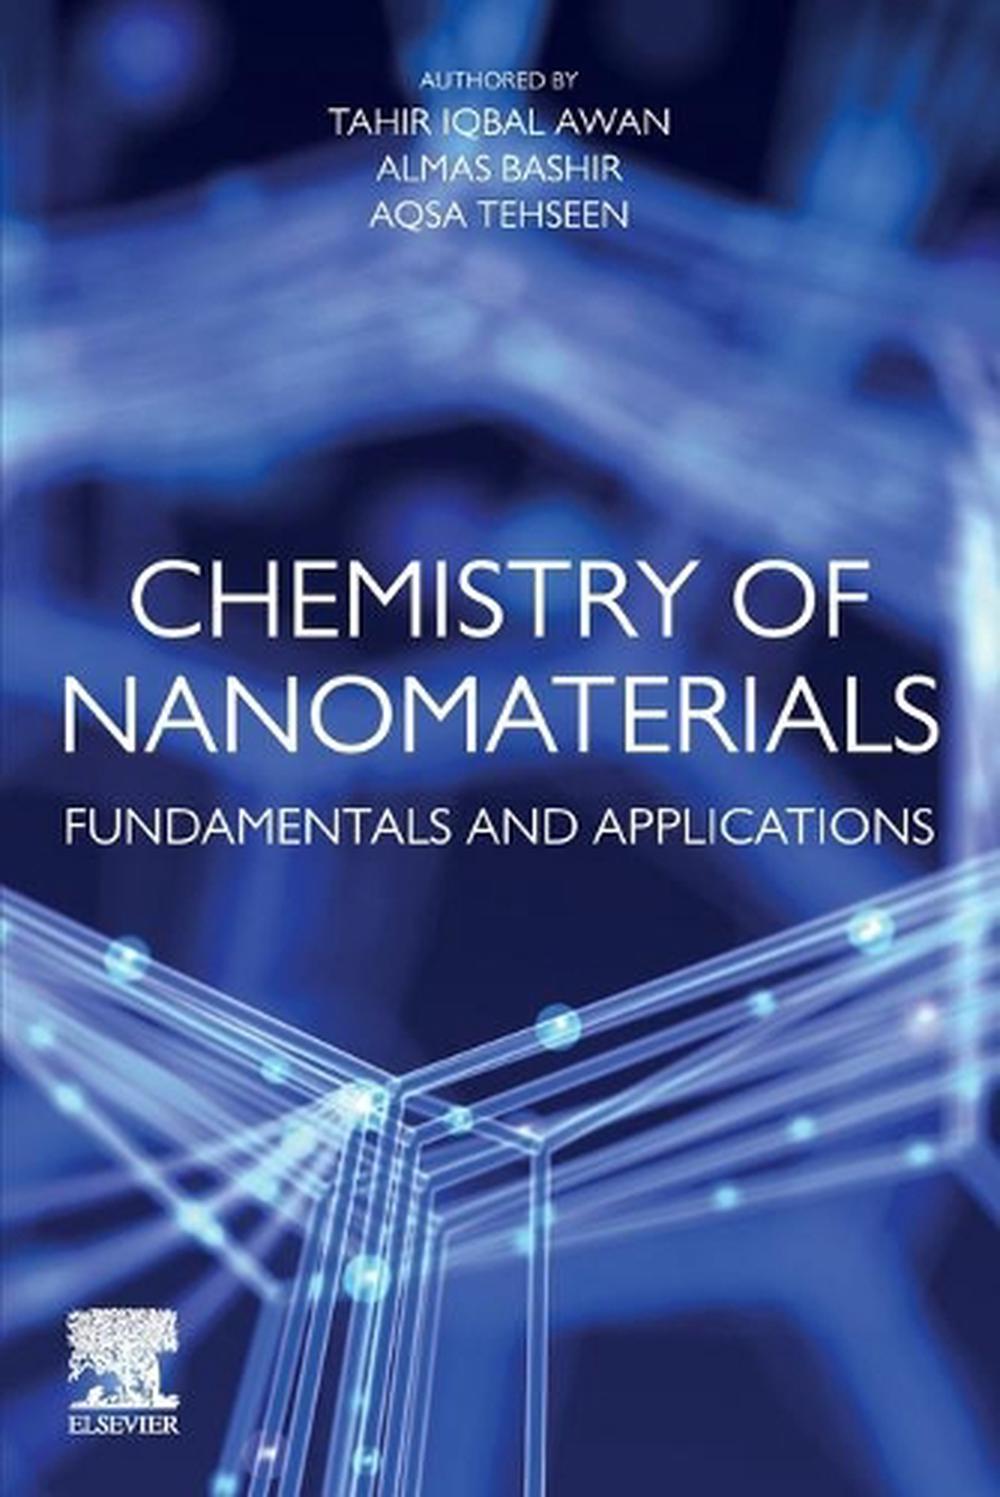 Chemistry Of Nanomaterials Fundamentals And Applications By Tahir